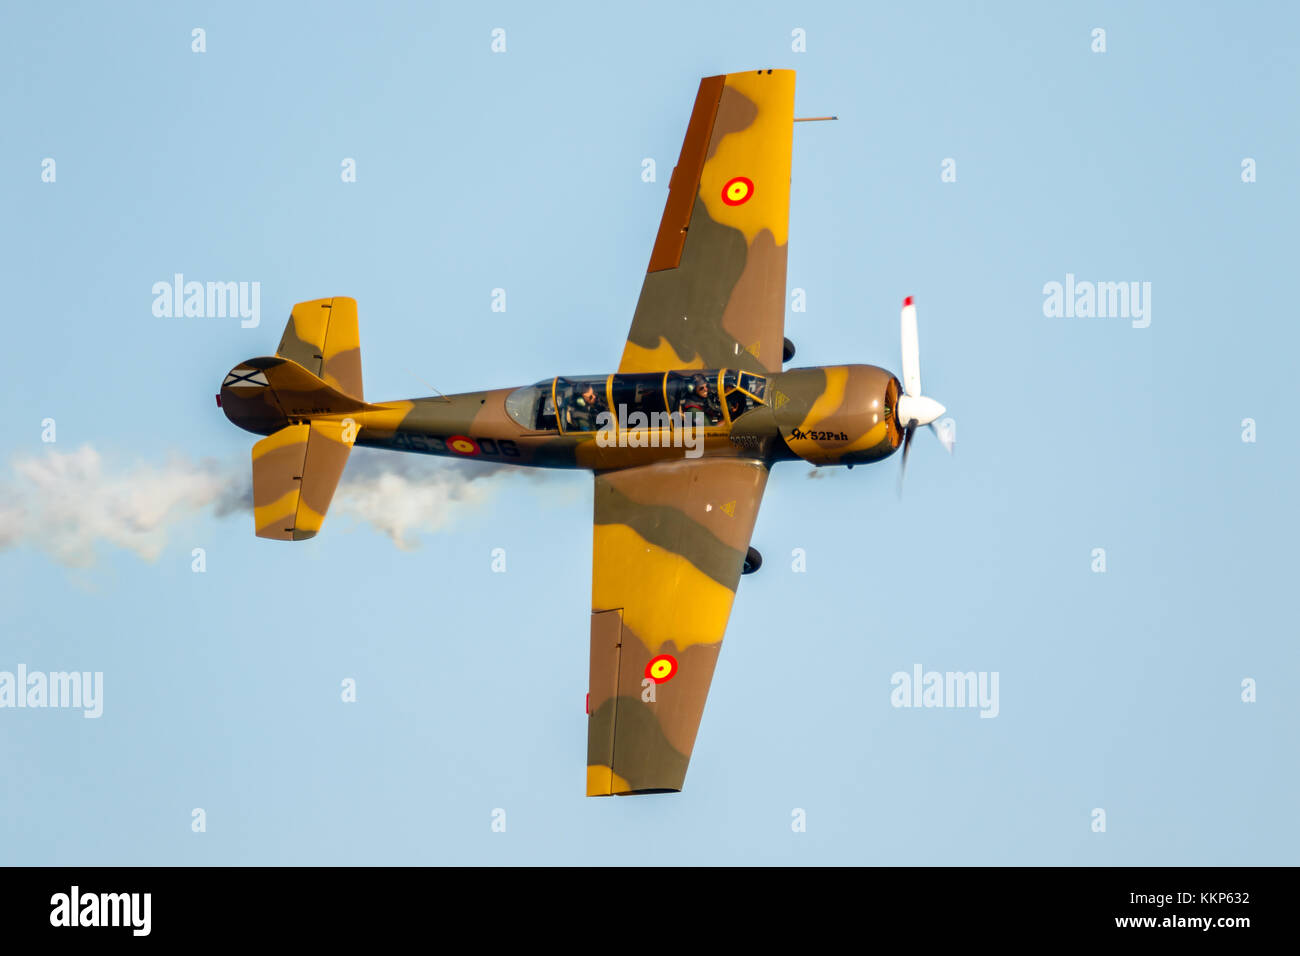 TORRE DEL MAR, MALAGA, SPAIN-JUL 29: Aircraft Yakolev Yak-52 of Salva Ballesta taking part in a exhibition on the 2nd airshow of Torre del Mar on July Stock Photo